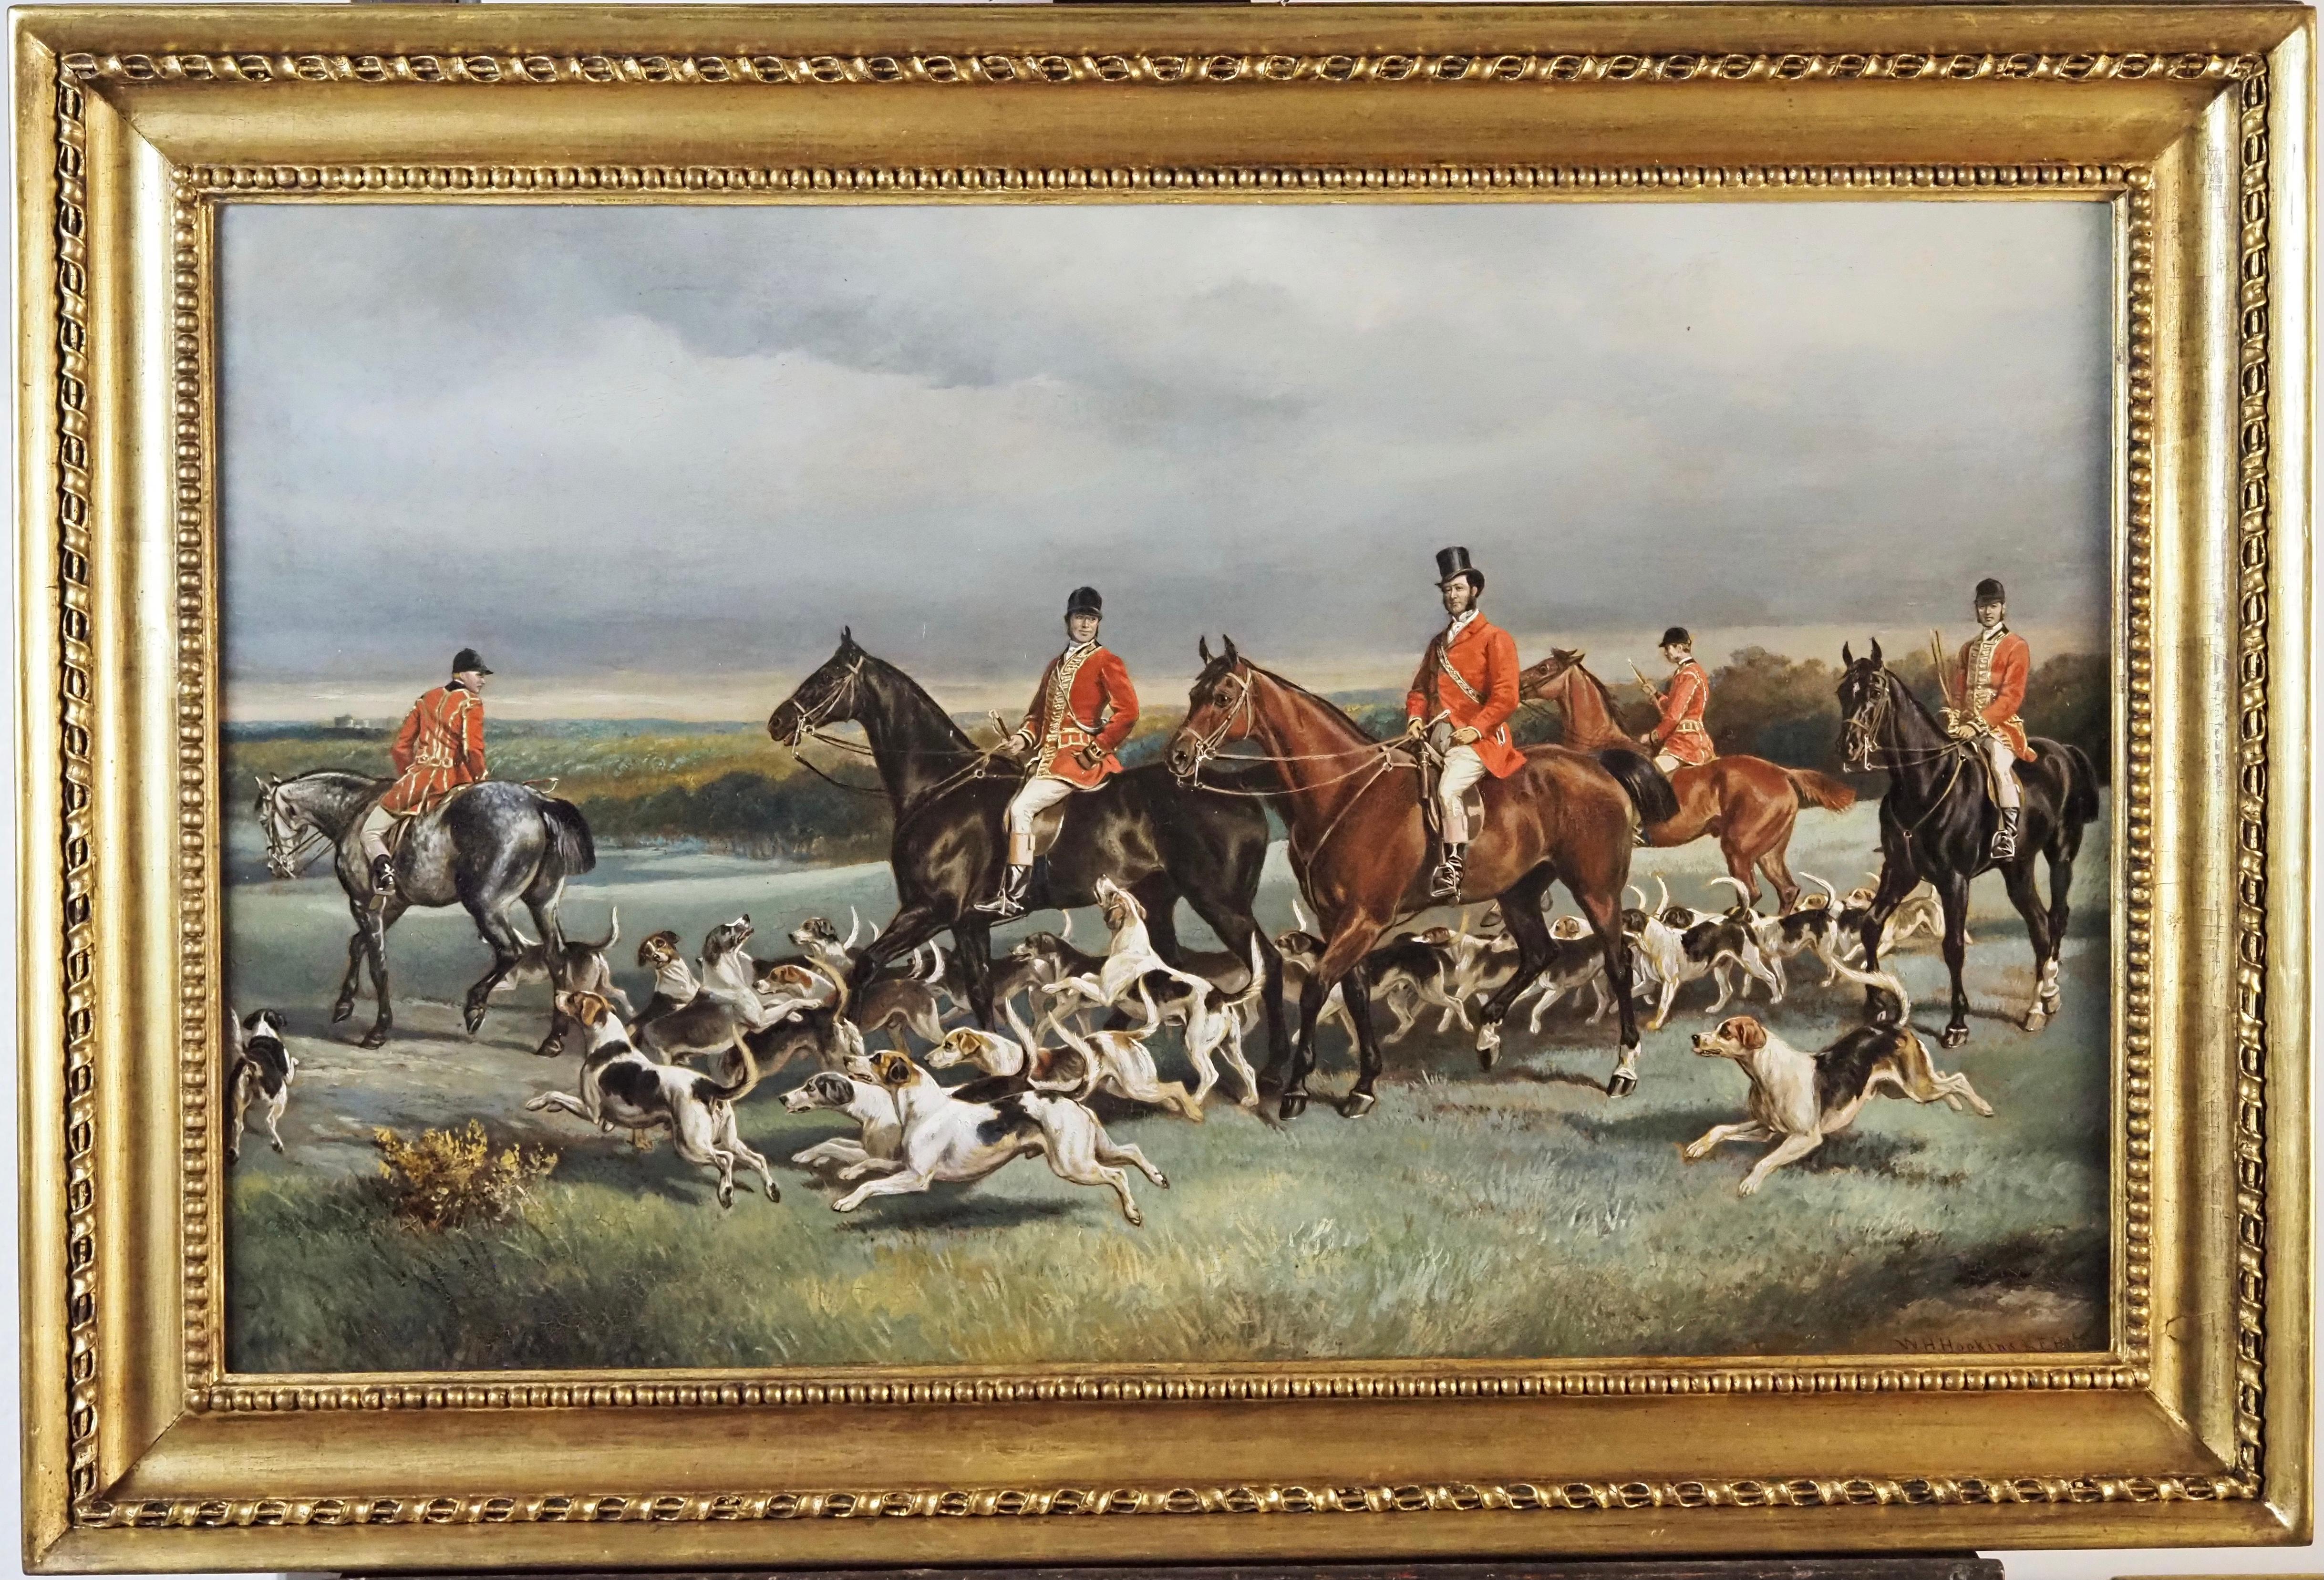 Edmund Havell Animal Painting - 'The Hunt Meet' - A hunting scene with horses and hounds in a landscape